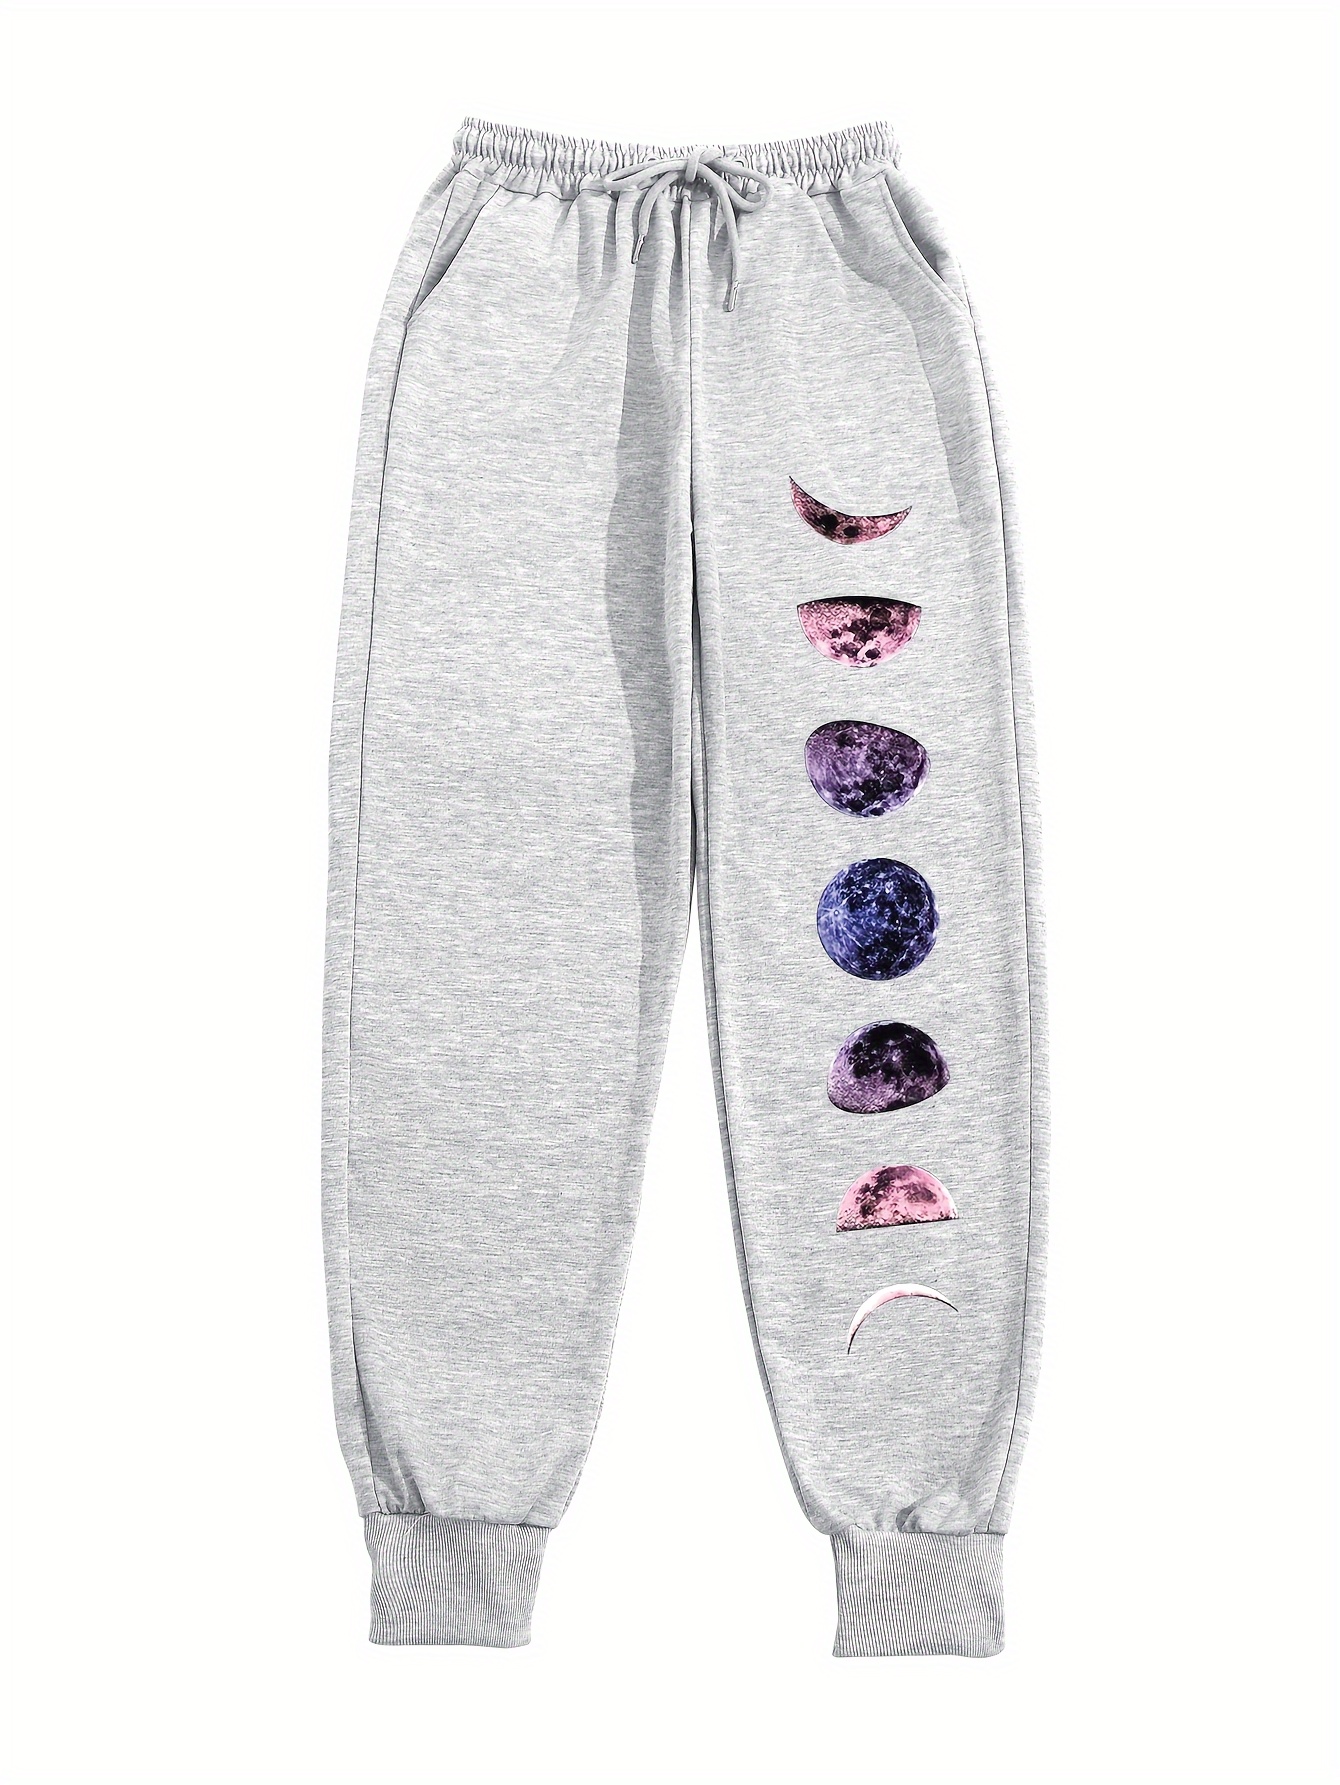 Casual Planet Print Drawstring High Waisted Sweatpants, Casual